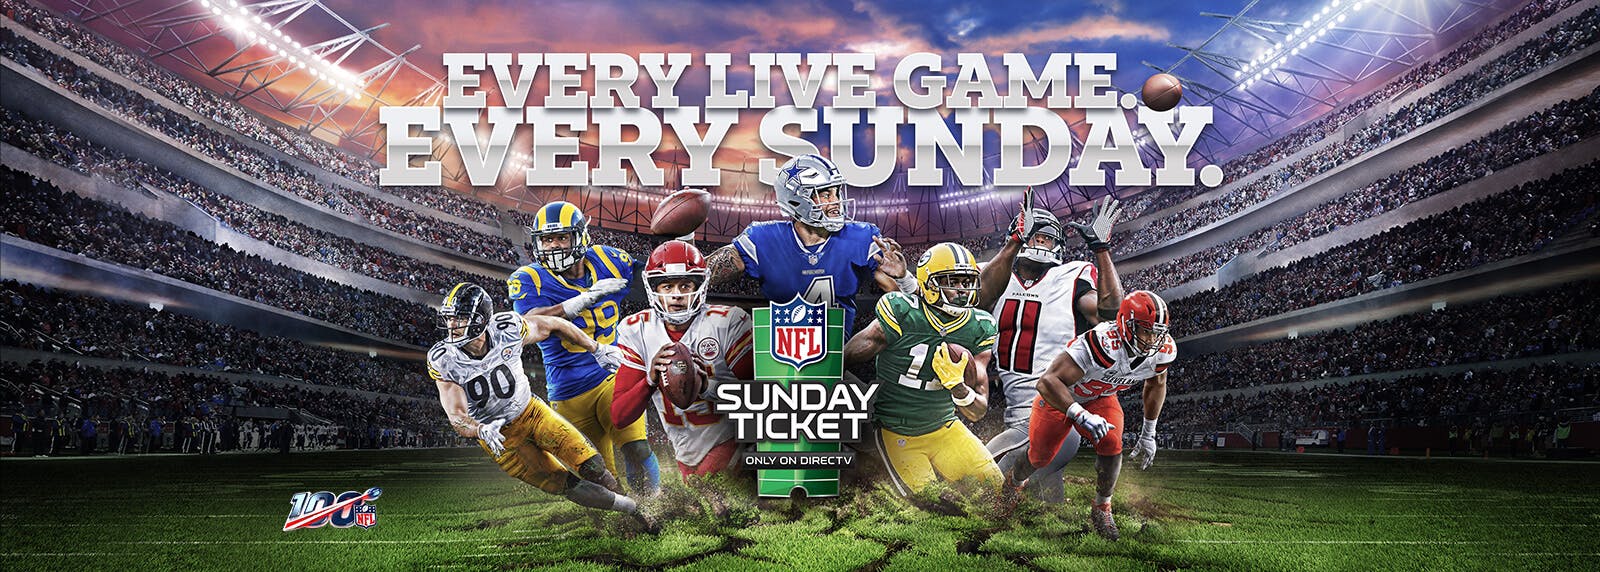 texans chargers NFL Sunday Ticket afc nfl cbs